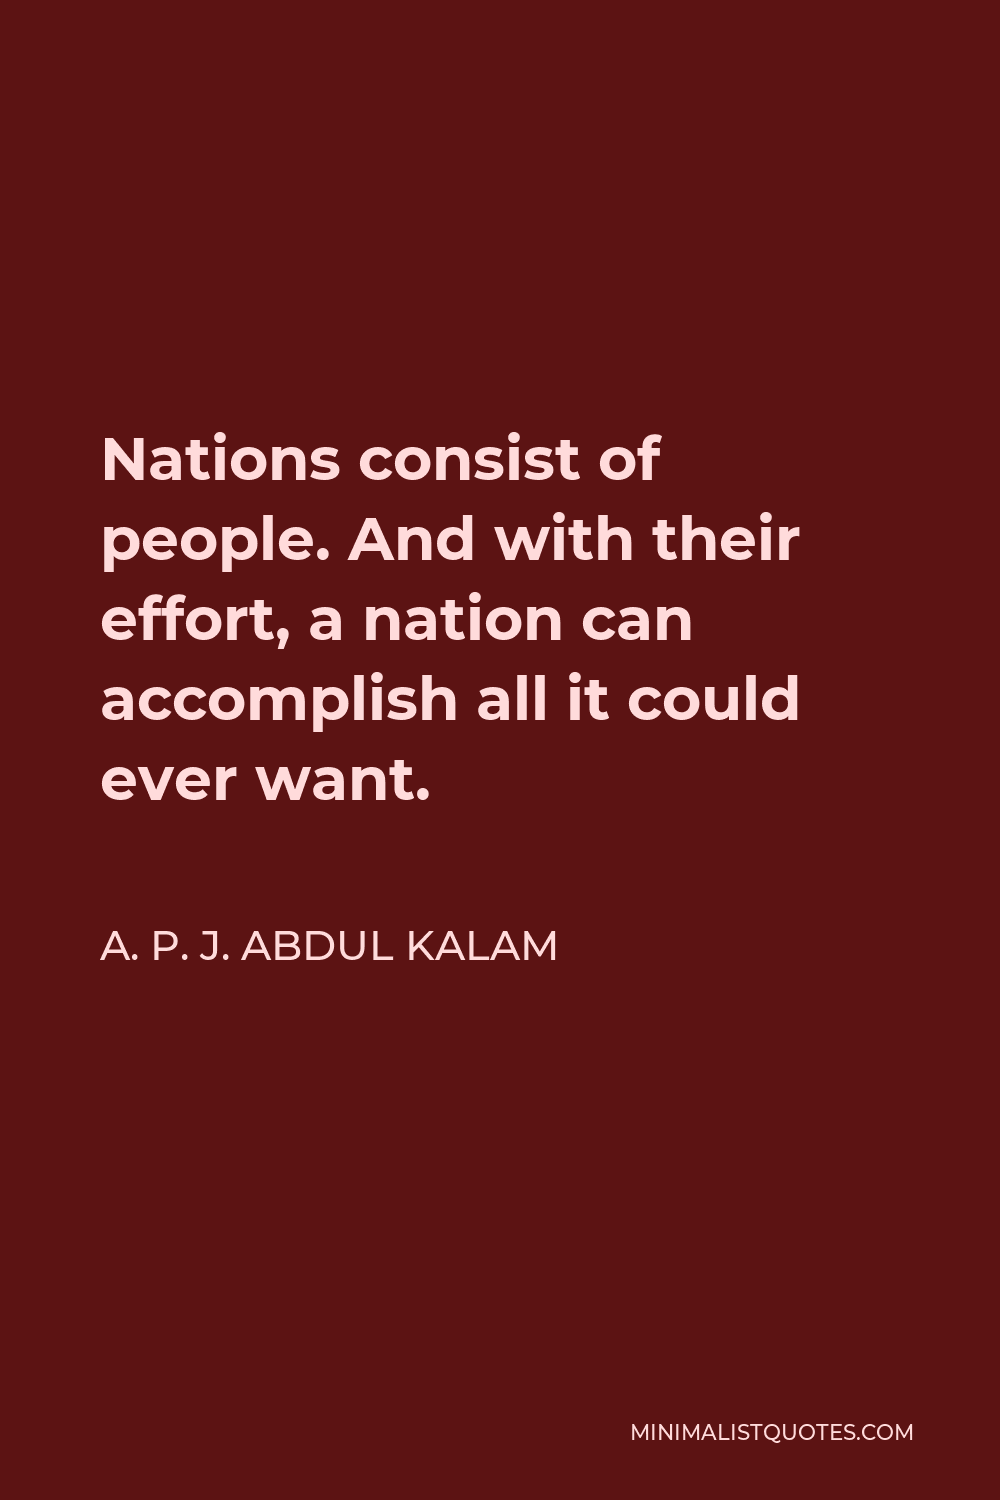 A. P. J. Abdul Kalam Quote - Nations consist of people. And with their effort, a nation can accomplish all it could ever want.